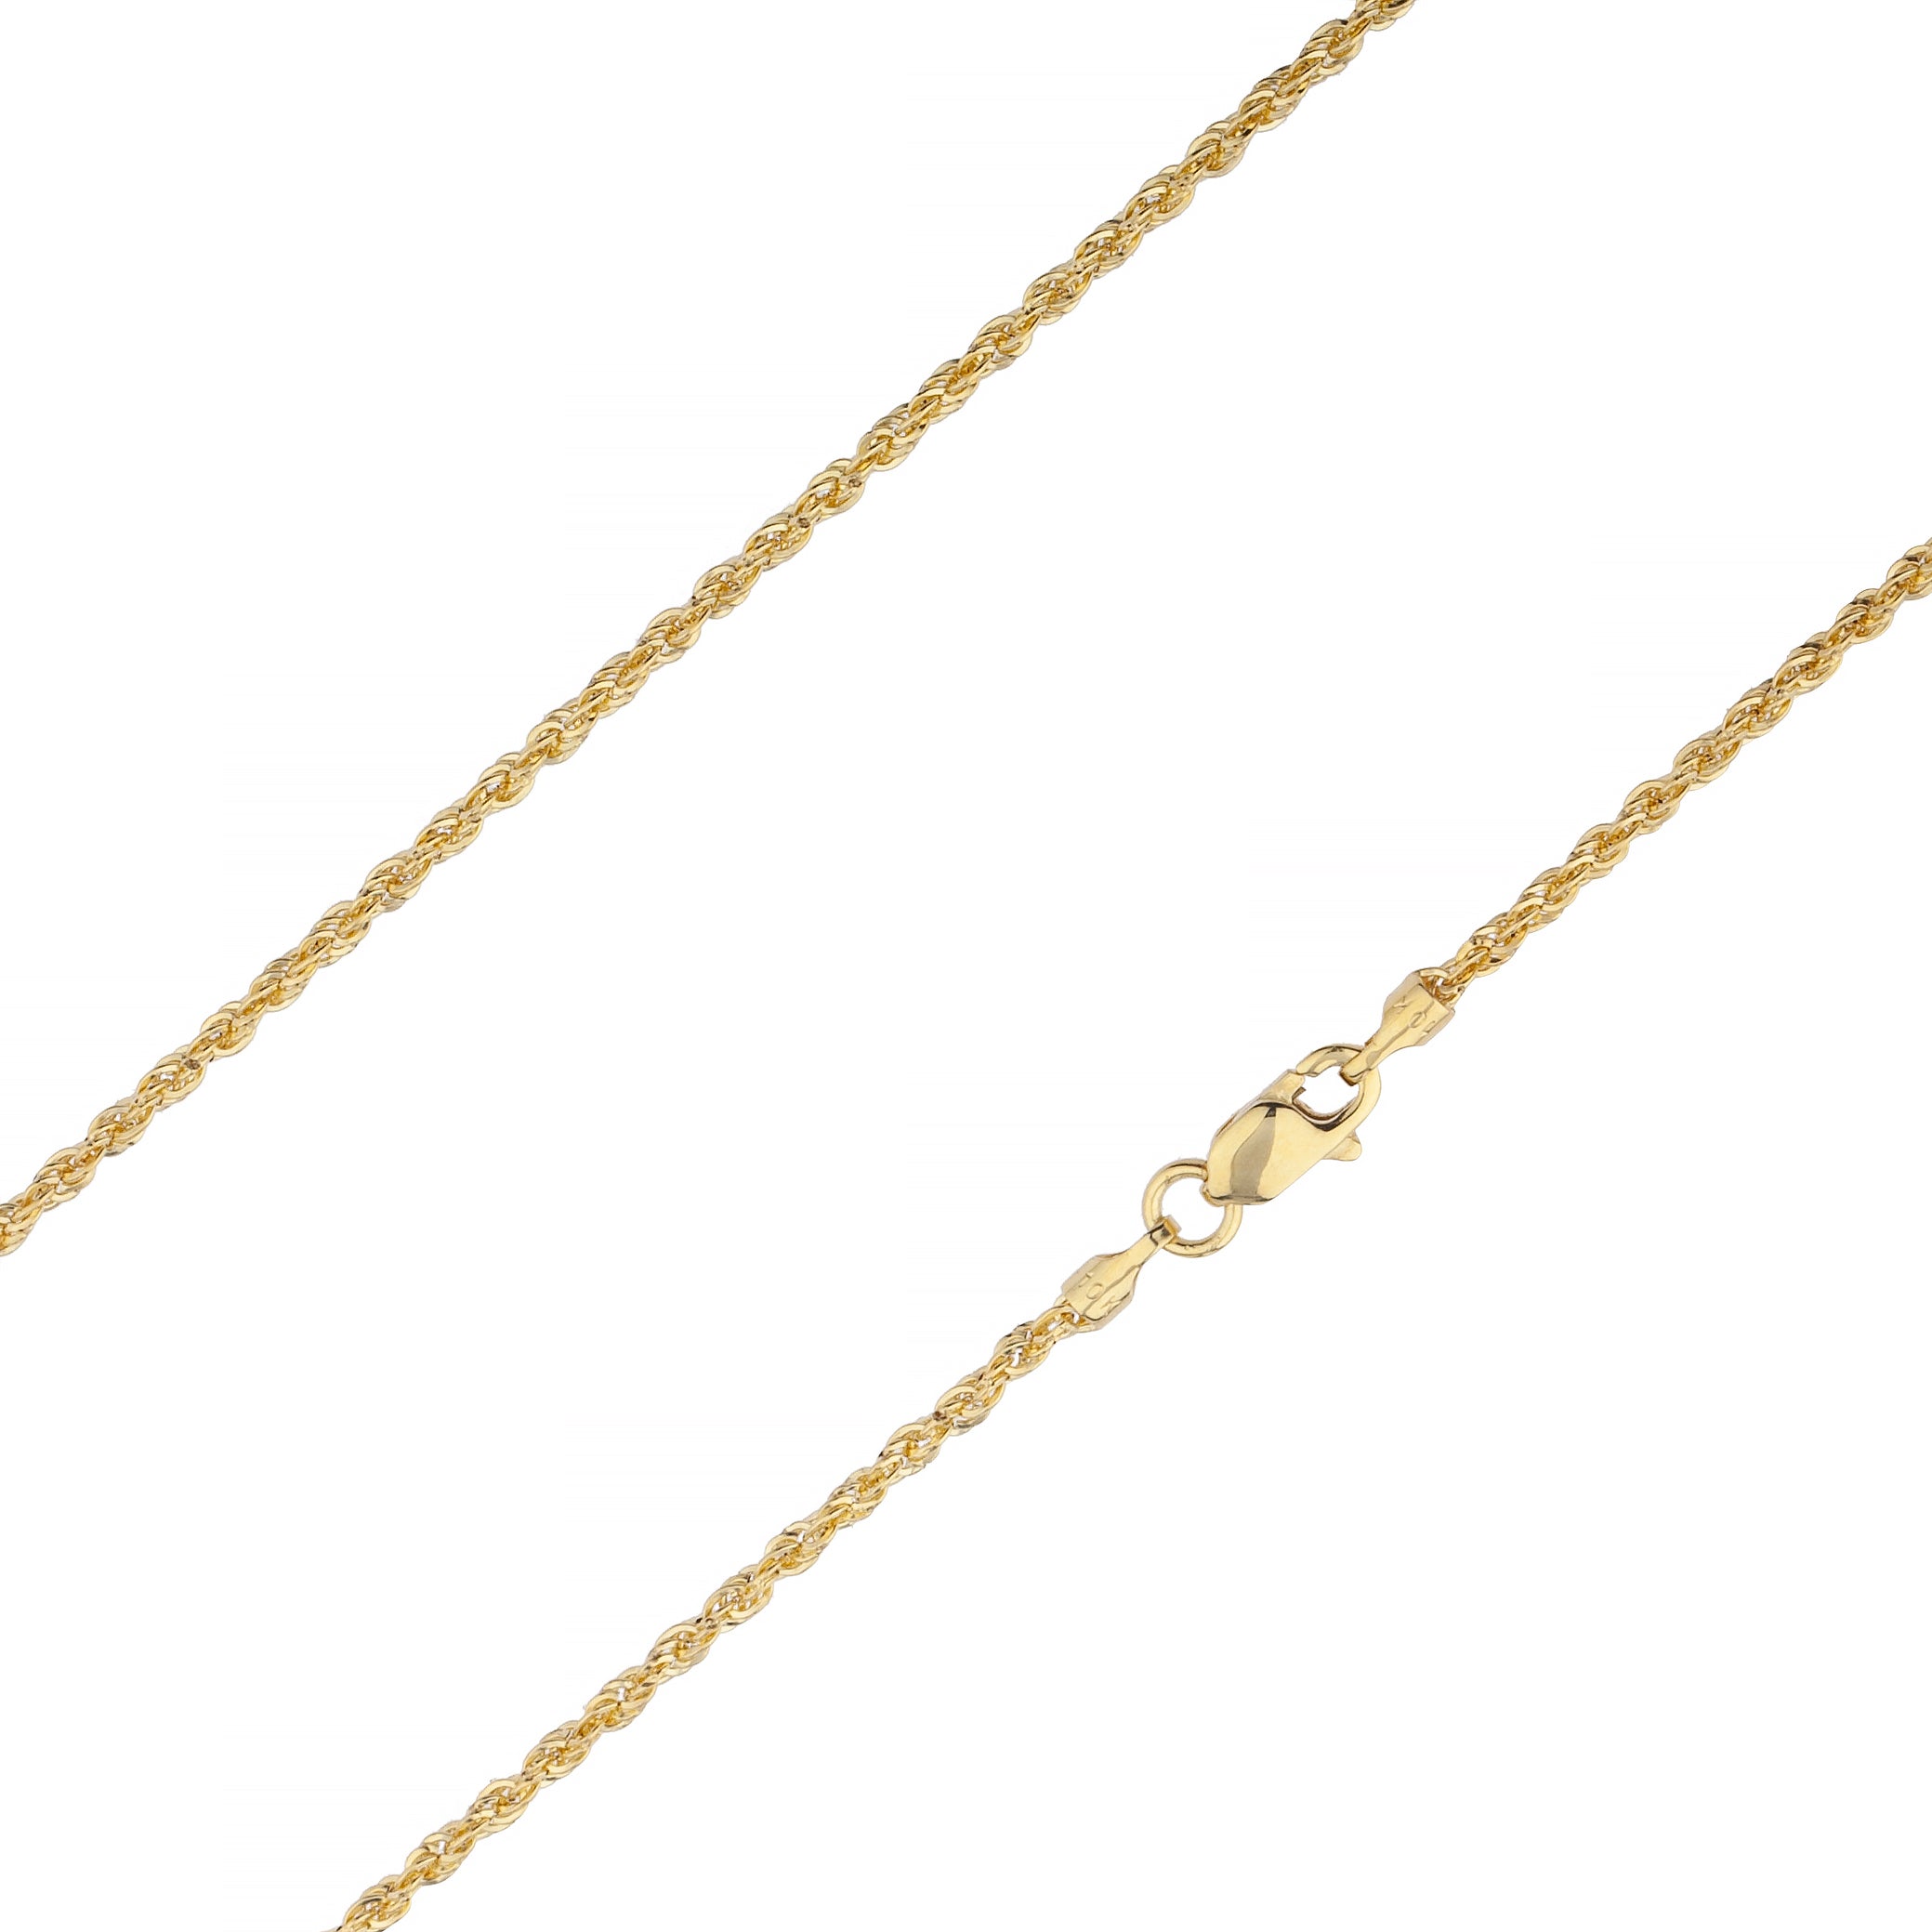 14k Gold Rope Chain, Sailor Lock Clasp Necklace  5mm Straw Mesh Gold Chain,  Reversible 2 in 1 Necklace, Add Charm to Clasp, Gift for Her